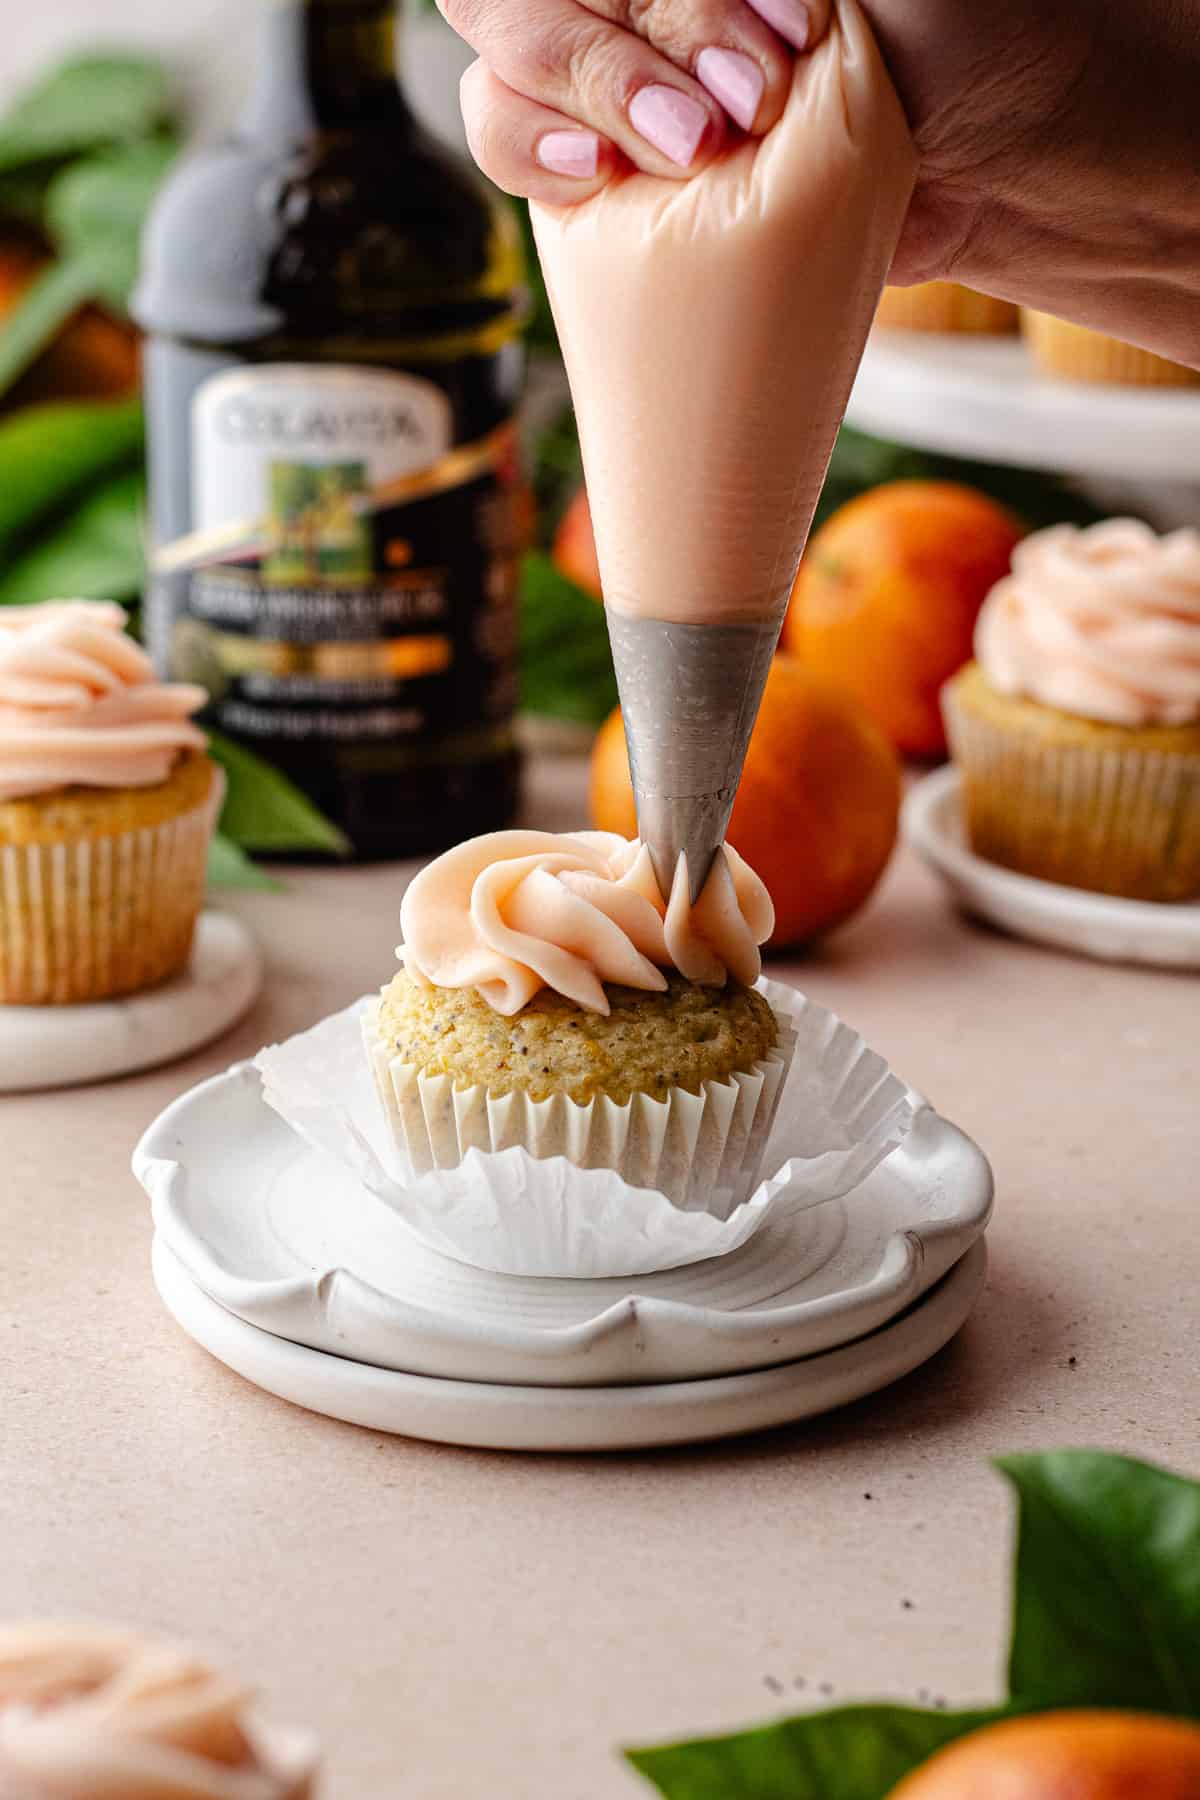 Piping cream cheese frosting onto a cupcake.